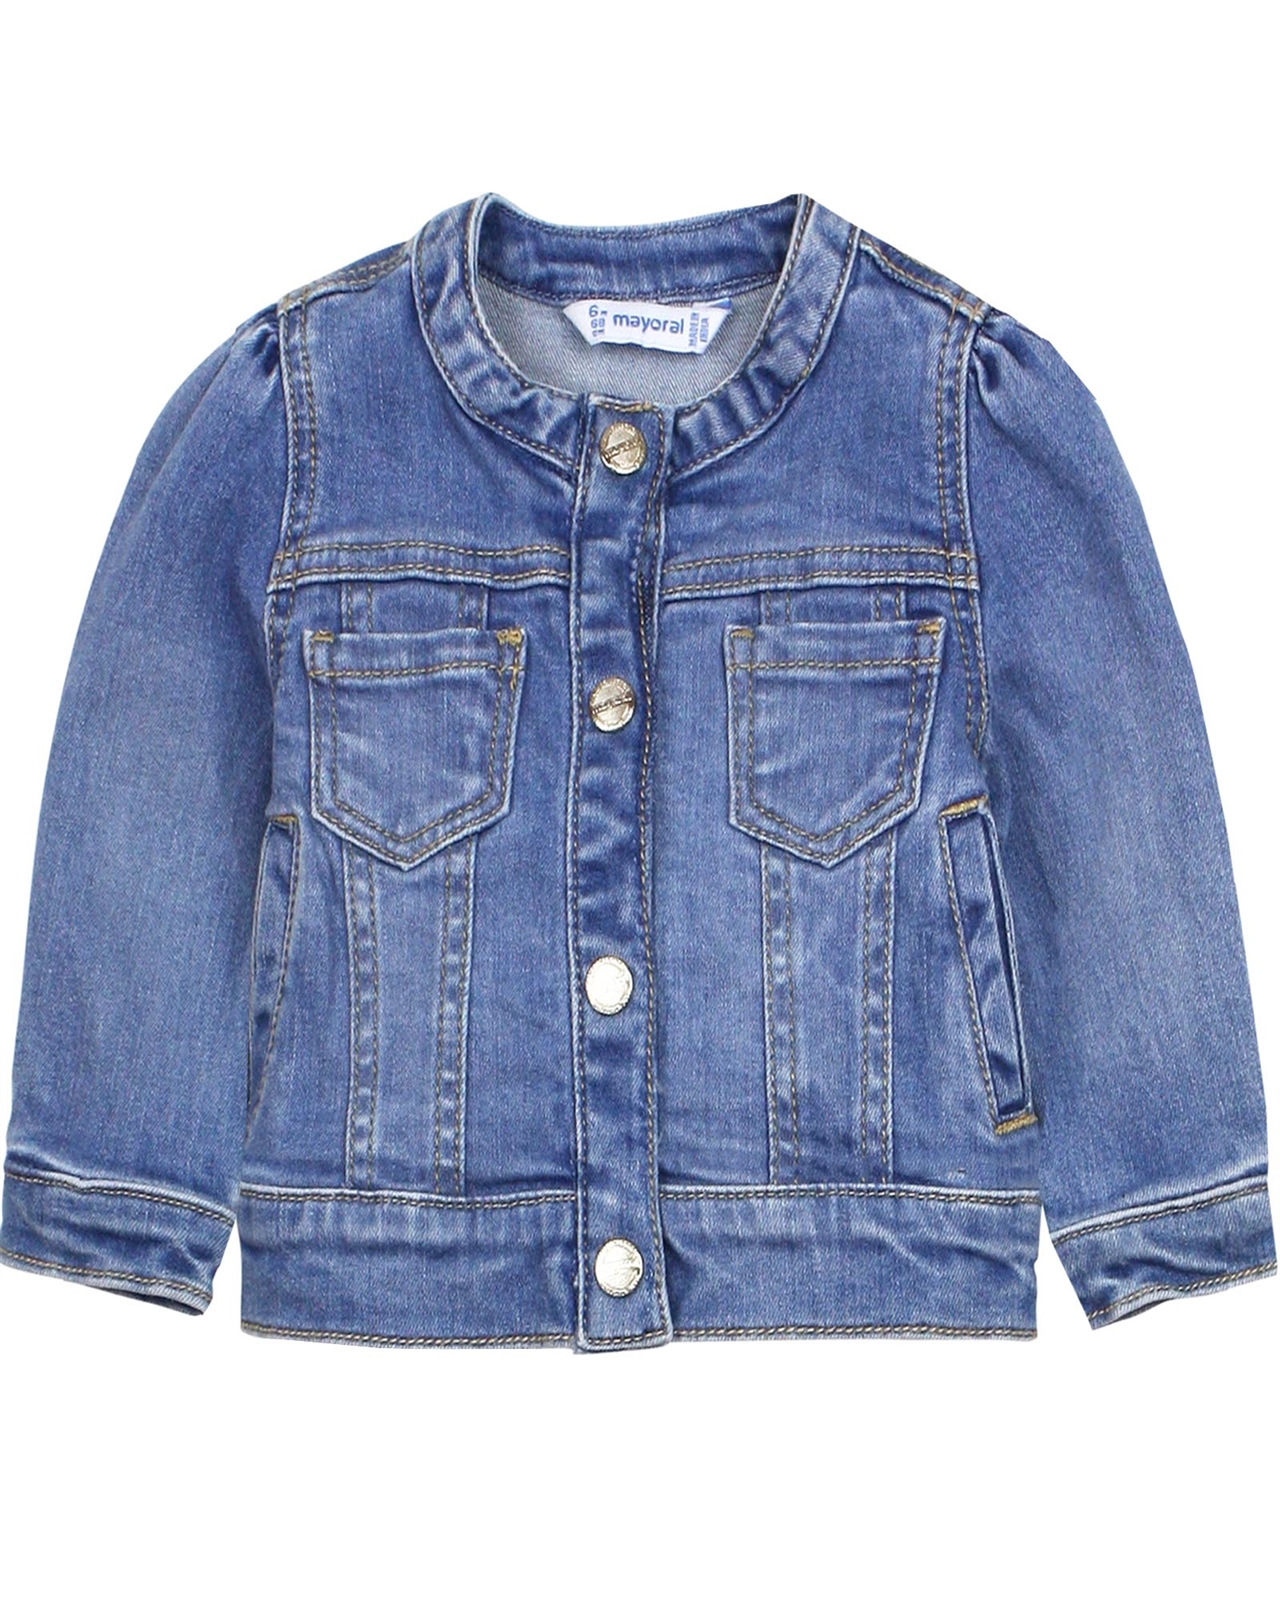 Cheap Girls' Jean Jacket Solid Color Polo Collar Children's Casual Tops |  Joom